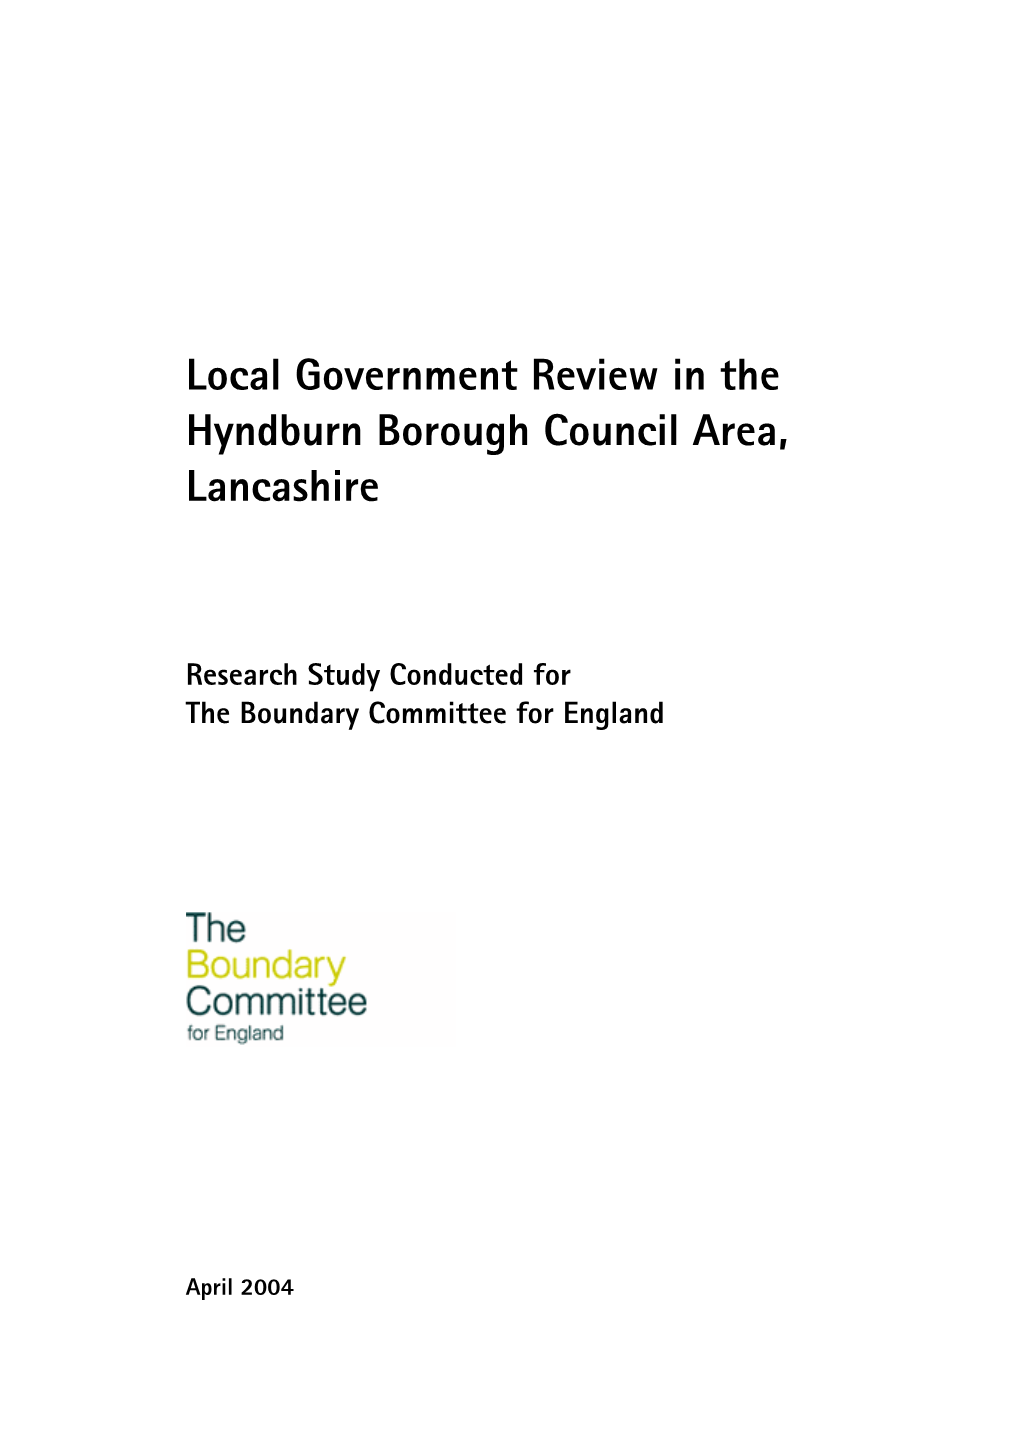 Local Government Review in the Hyndburn Borough Council Area, Lancashire